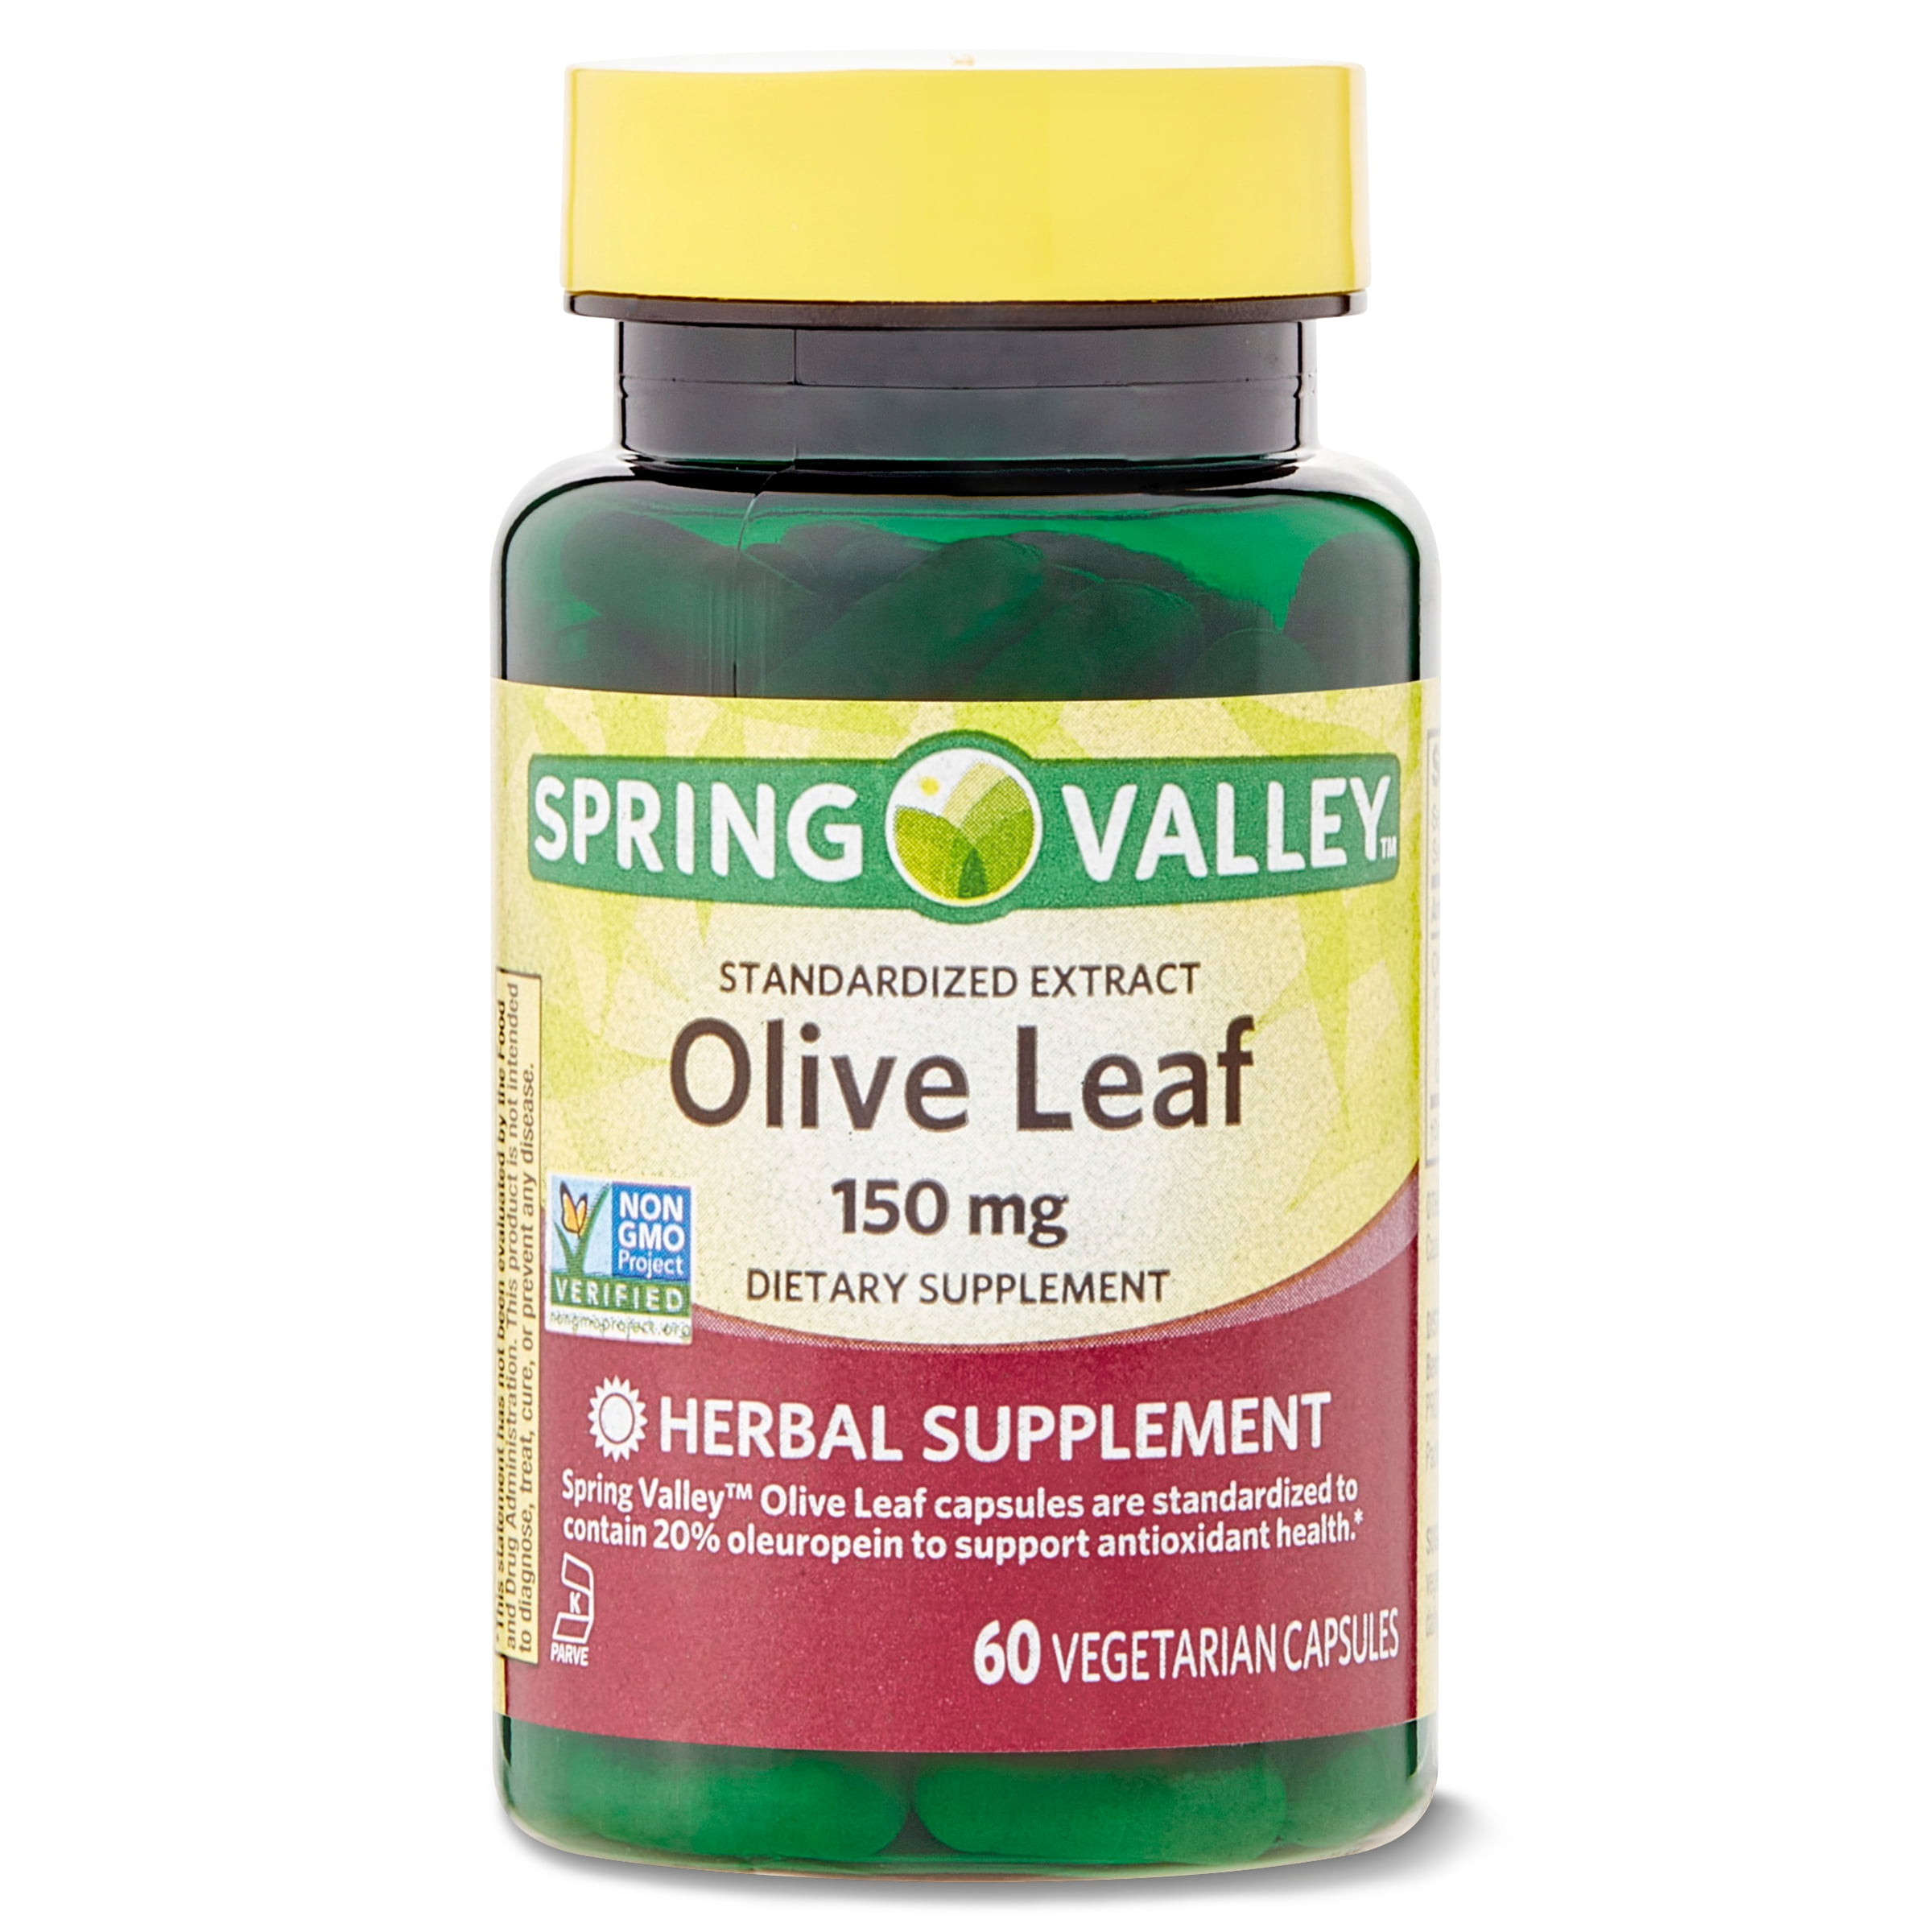 Spring Valley Standardized Count Capsules mg, Olive 150 Extract Dietary 60 Leaf, Supplement